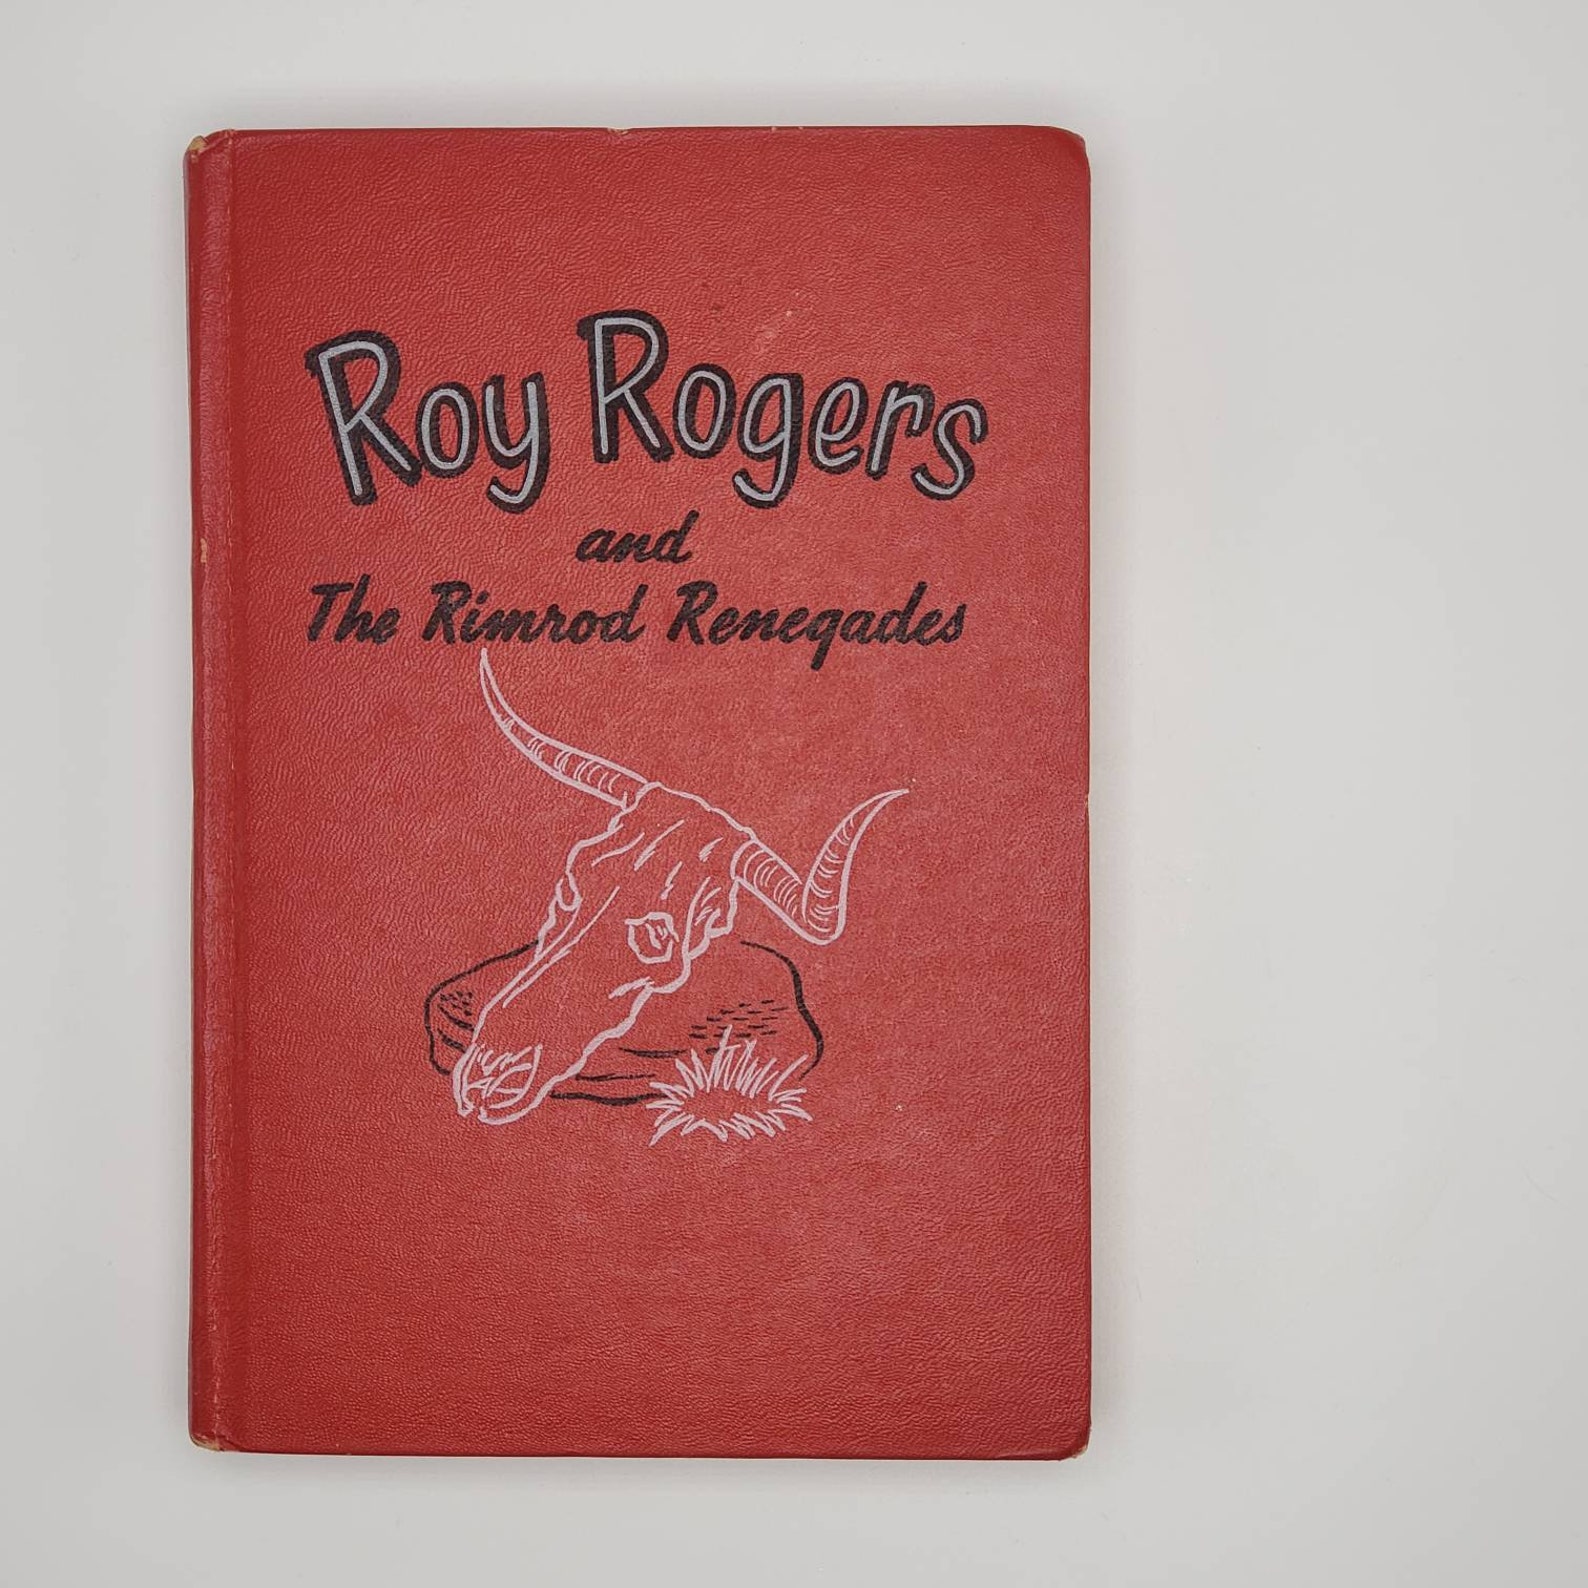 Roy Rogers Bundle the Rimrod Renegades & the Outlaws of Sundown Valley ...